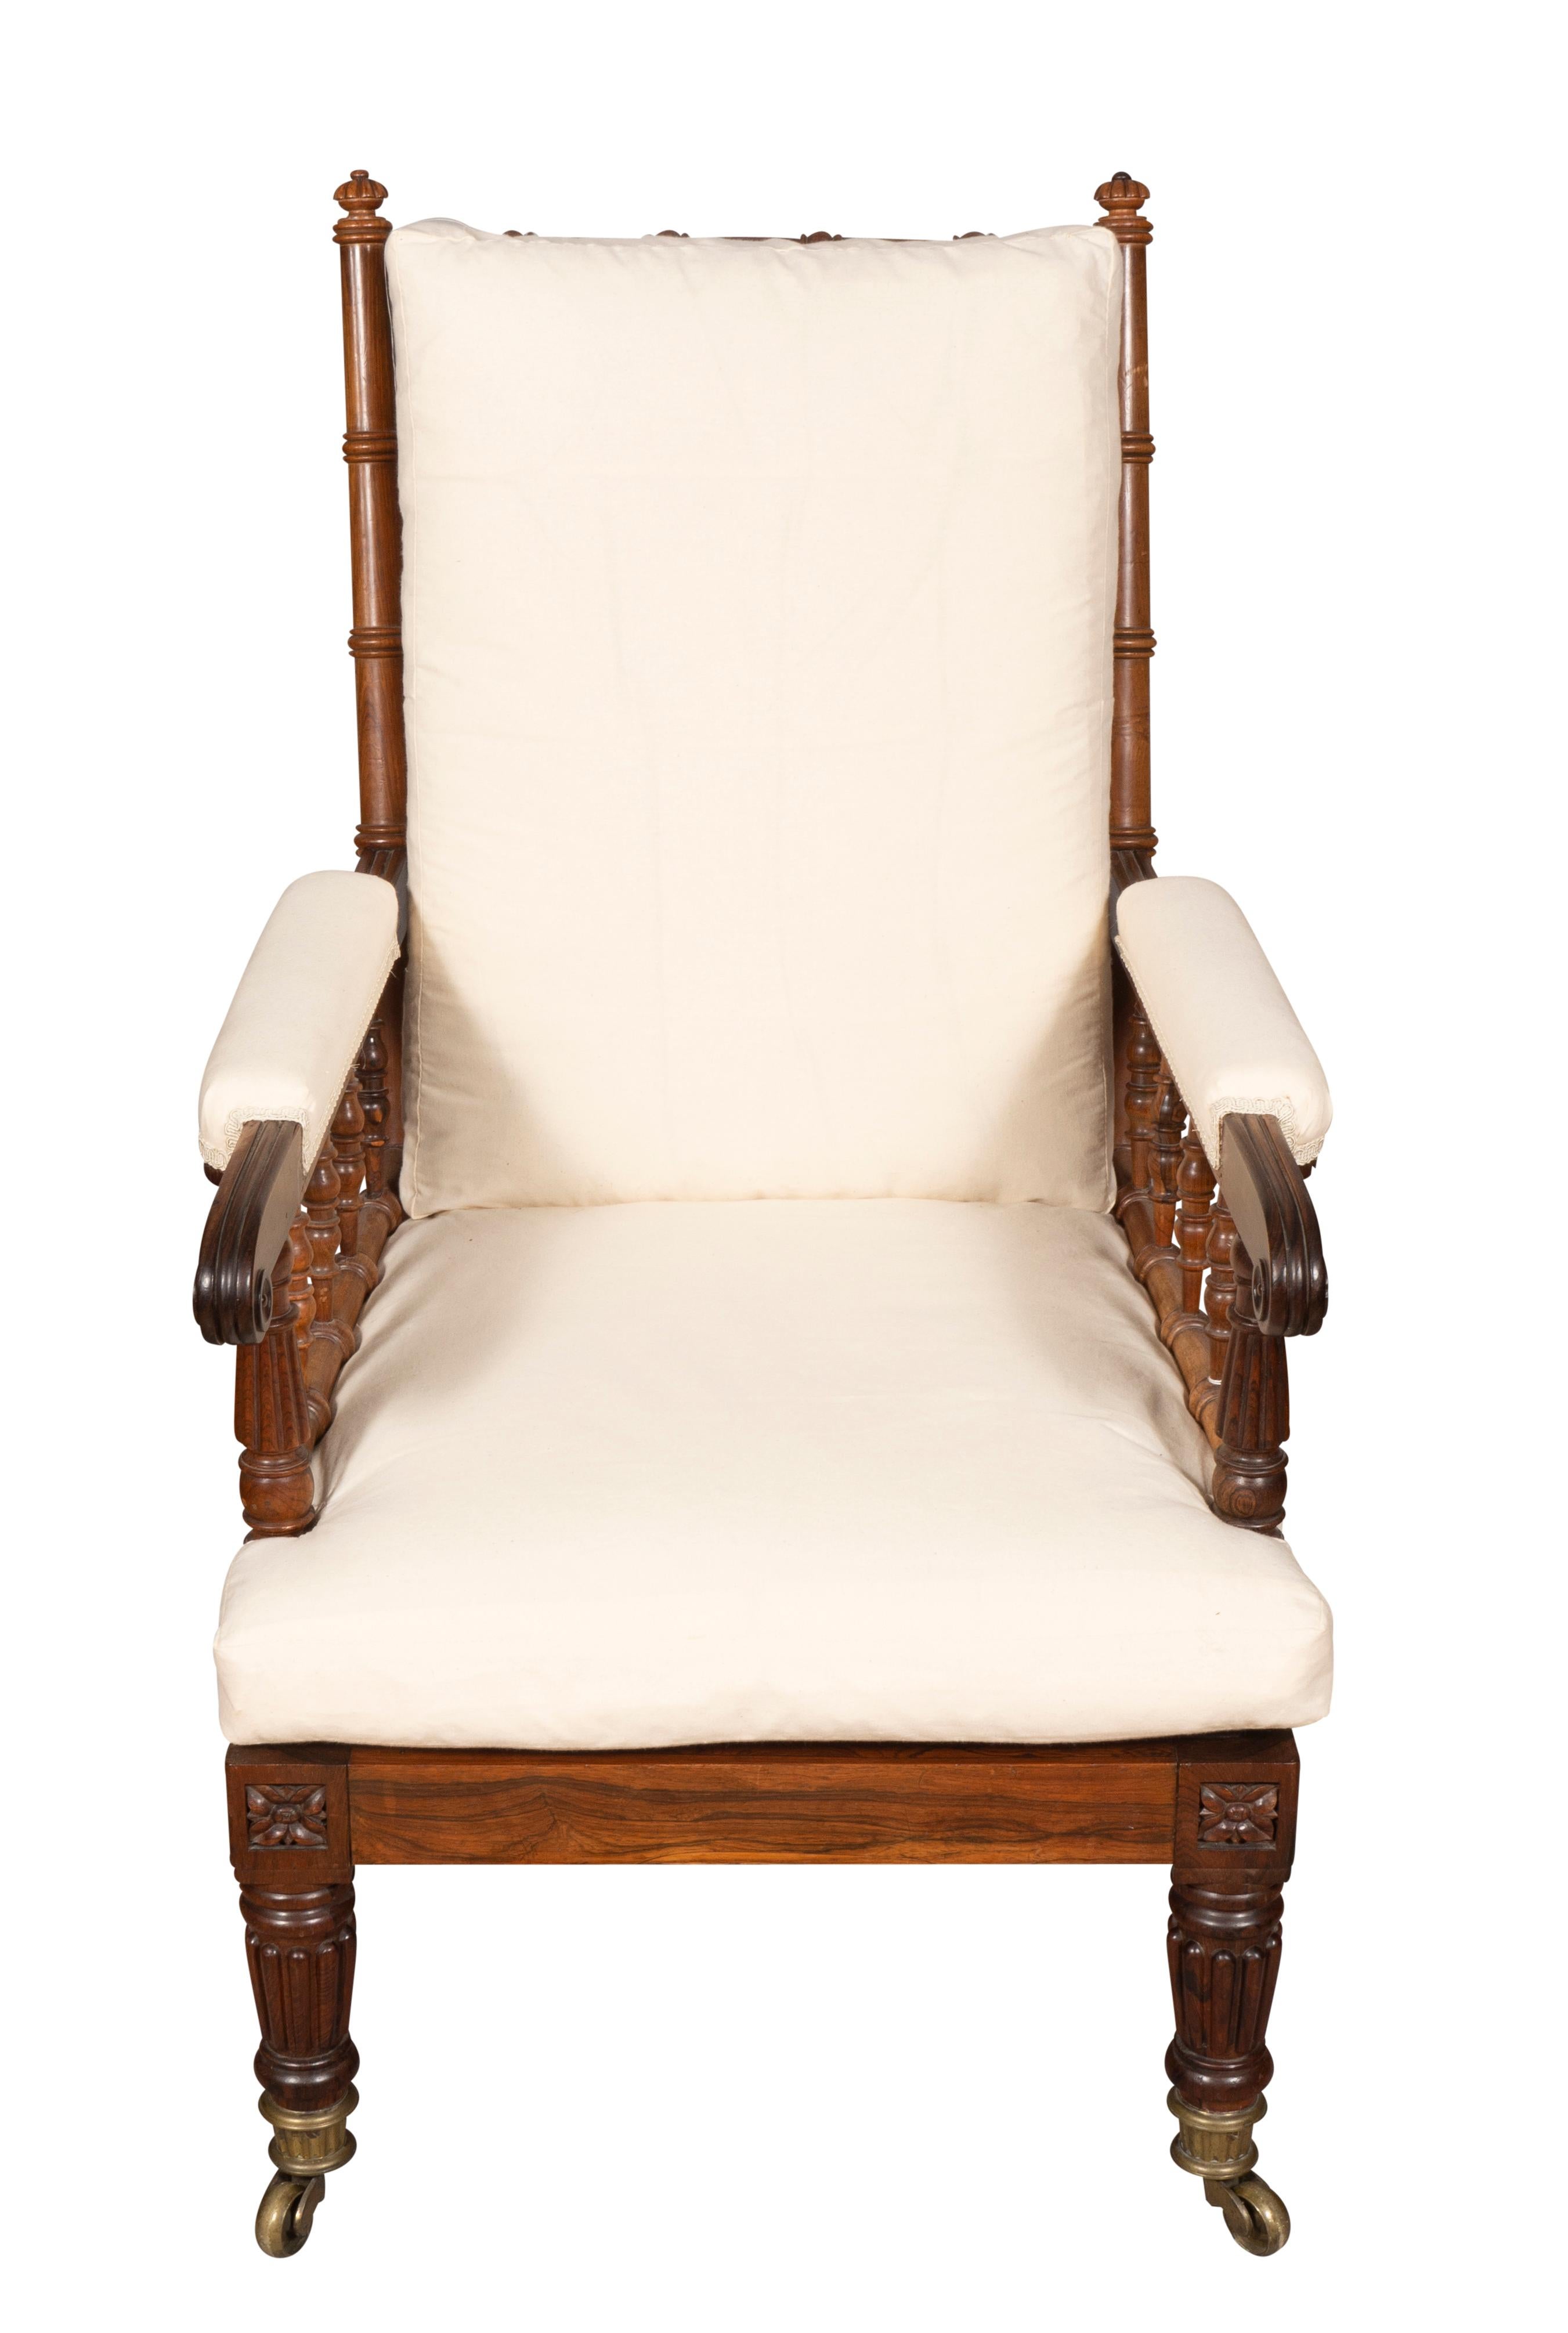 Regency Rosewood Armchair By Gillows For Sale 3